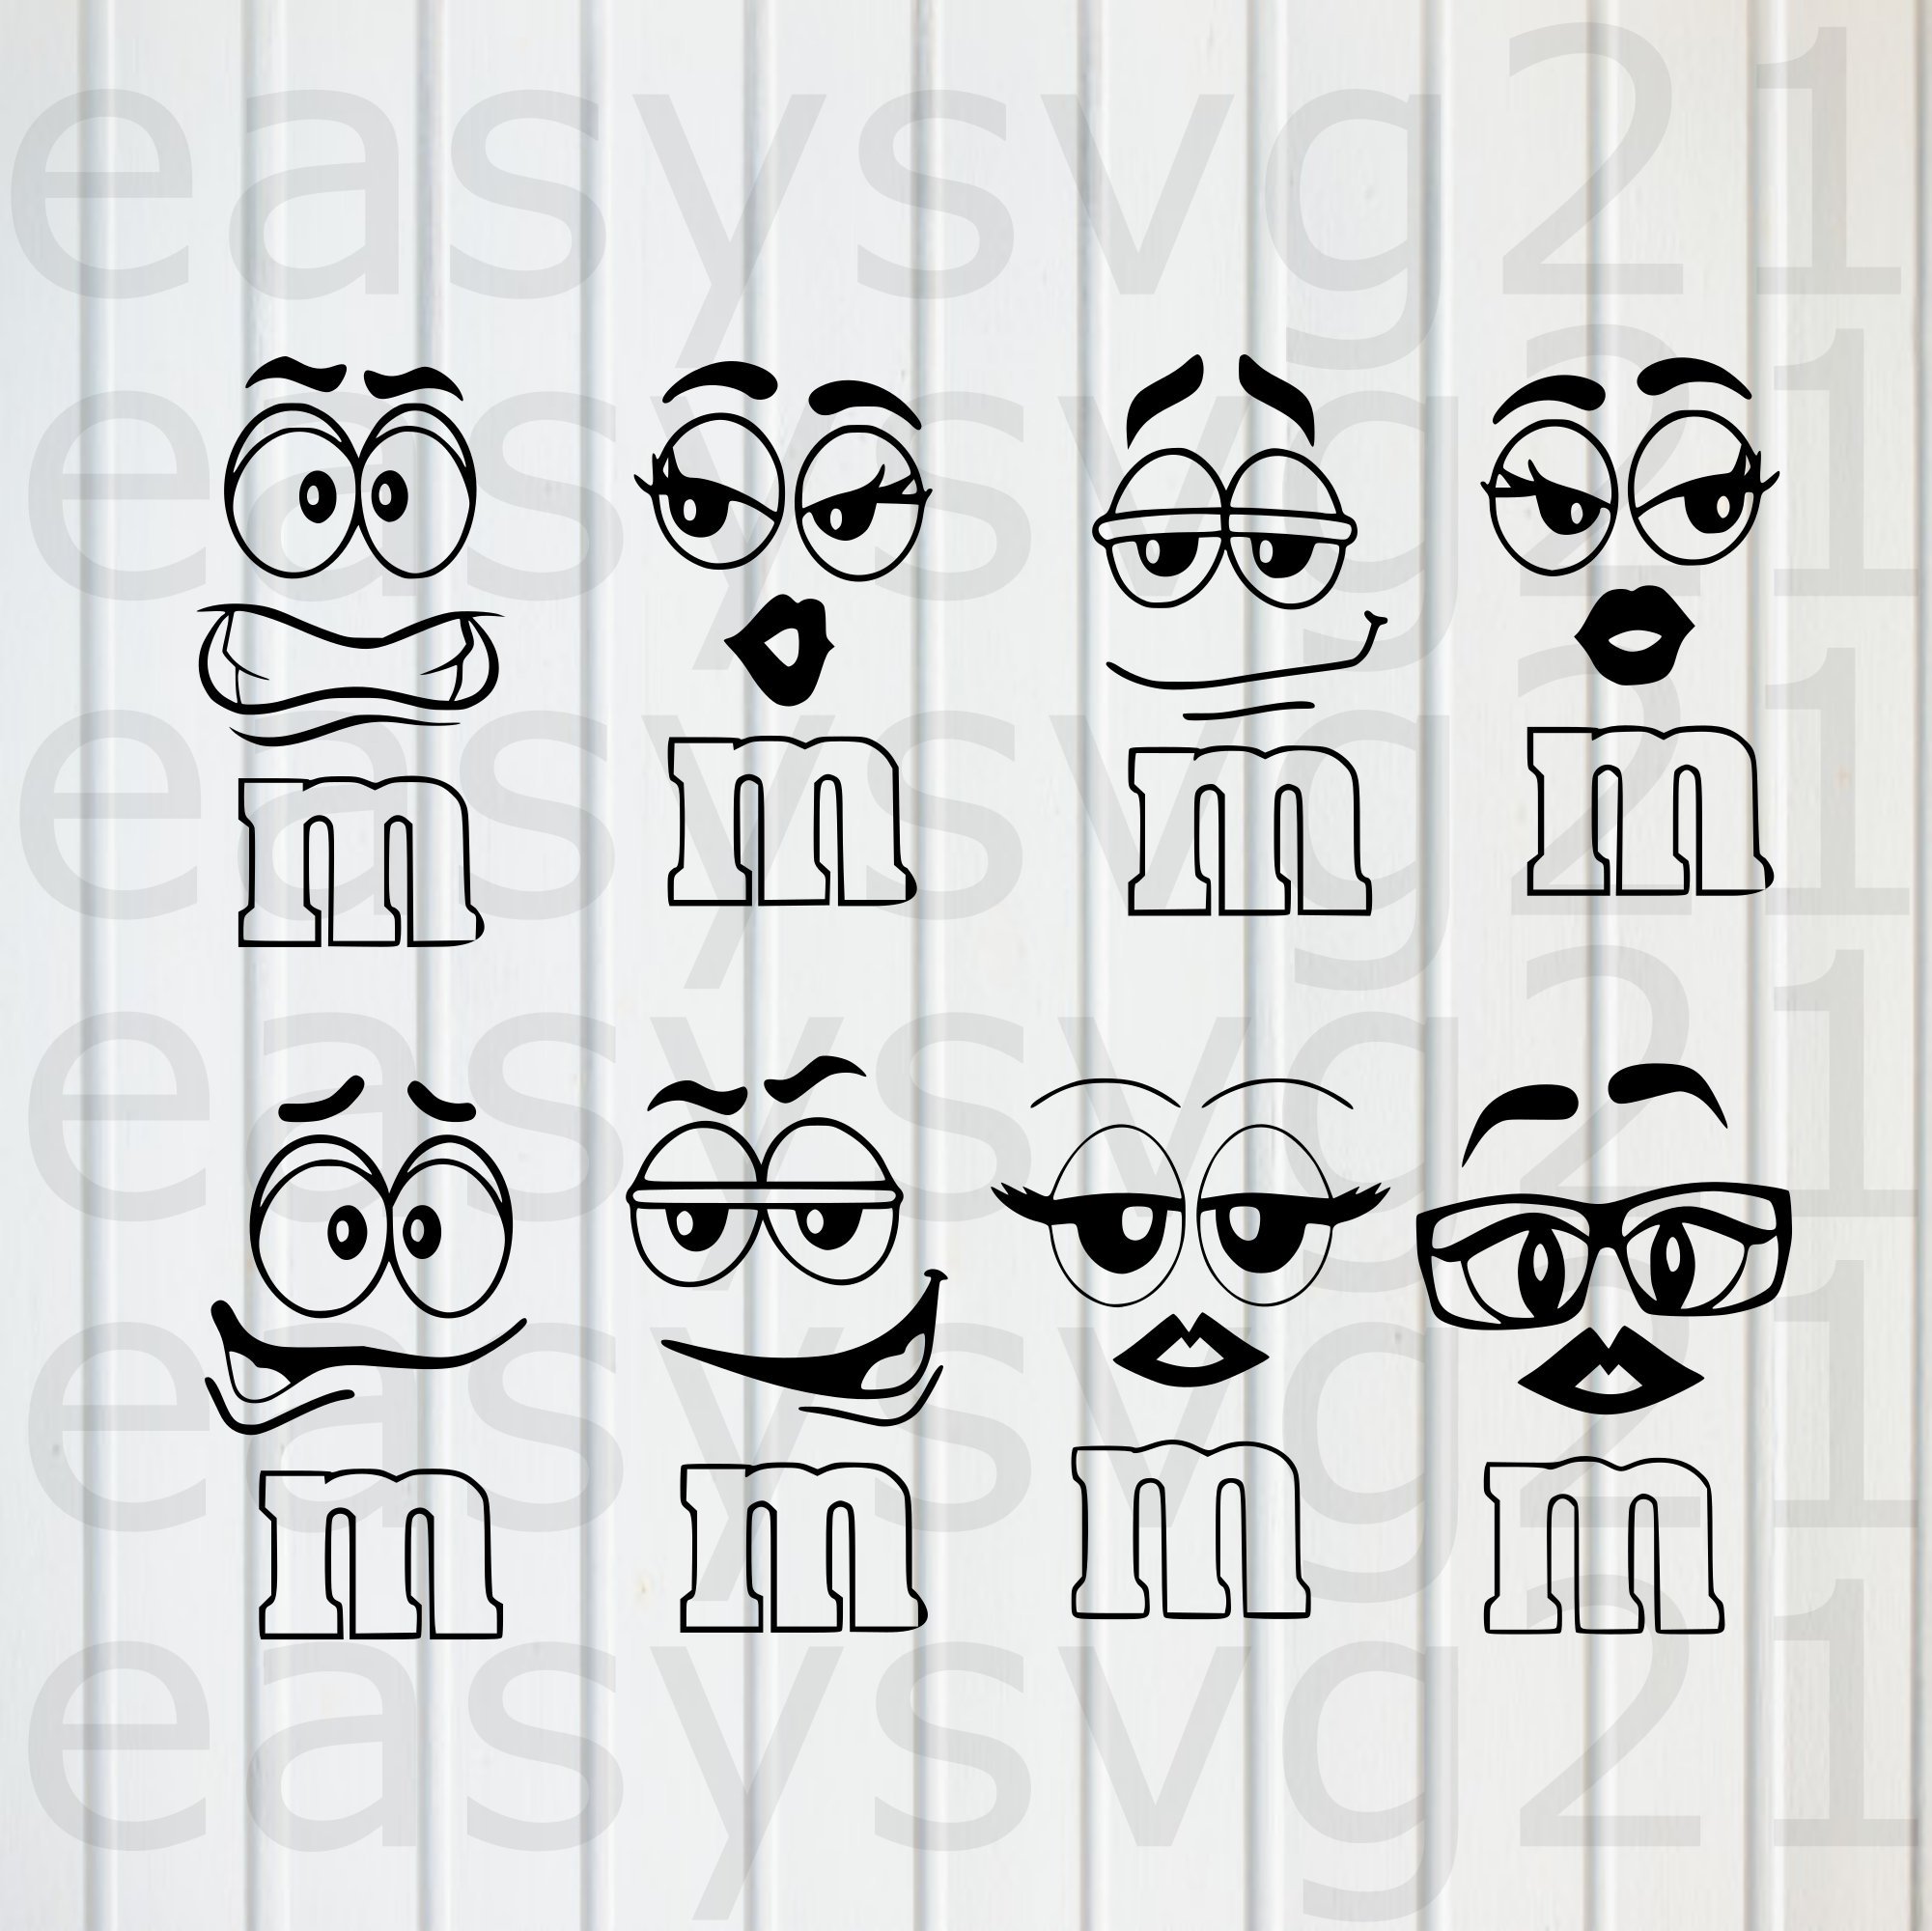 M&m Faces Clipart Transparent PNG Hd, Svg Creative Design Illustration I M  So Scary, Svg Hello, Terror, I M Very PNG Image For Free Download